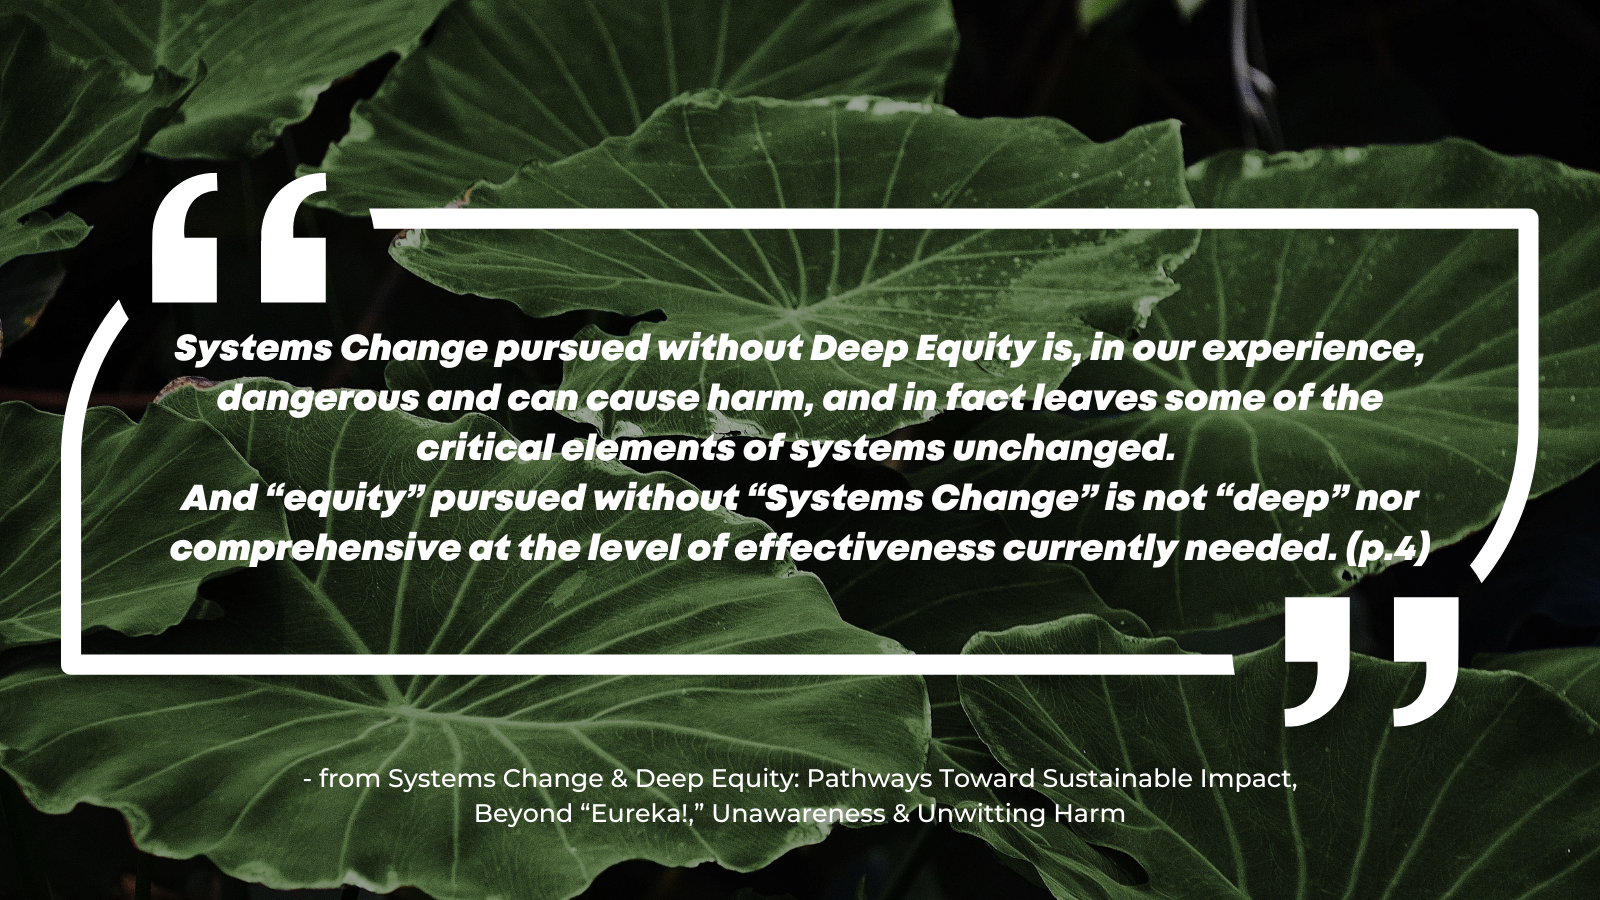 Systems Change pursued without Deep Equity is, in our experience, dangerous and can cause harm, and in fact leaves some of the critical elements of systems unchanged. And “equity” pursued without “Systems Change” is not “deep” nor comprehensive at the level of effectiveness currently needed. (p.4)